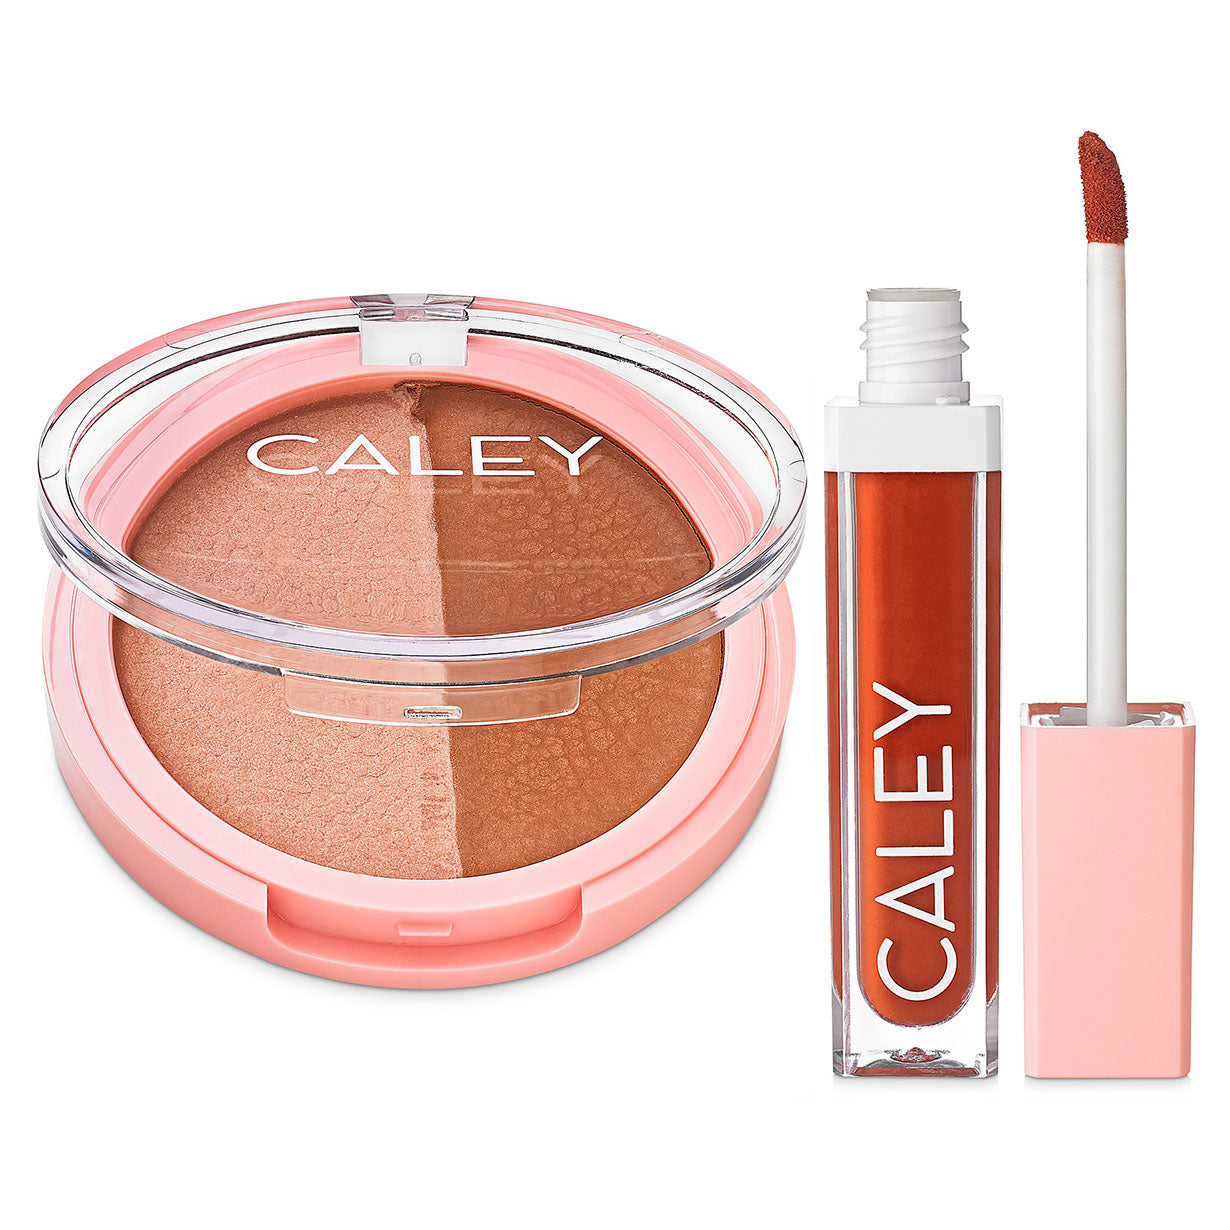 Glow Getter Bundle Face Makeup Caley Peach Glow Tigerlily 